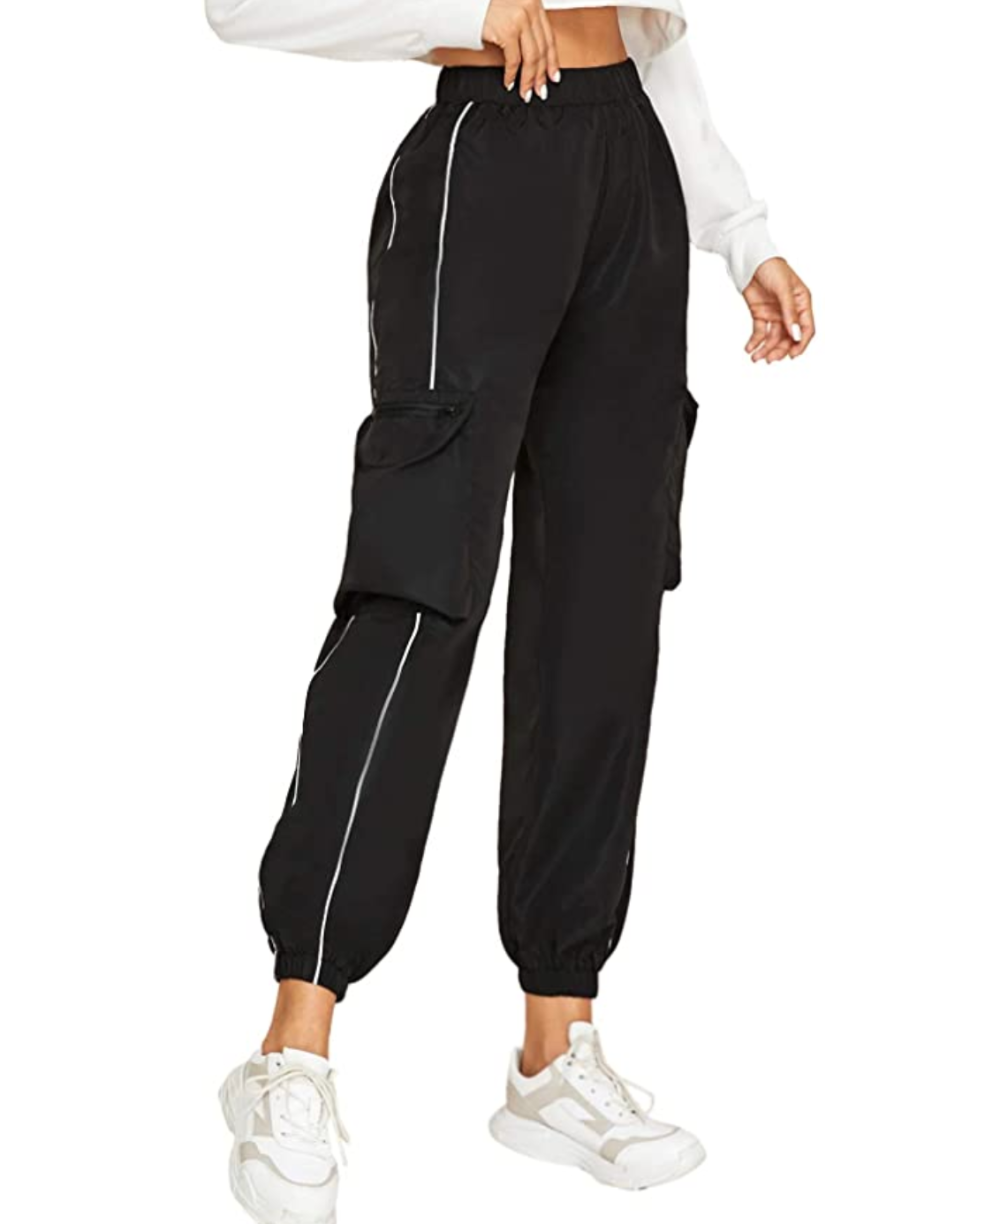 The Best Prime Day Deal on Joggers — Up to 60% Off! | Us Weekly